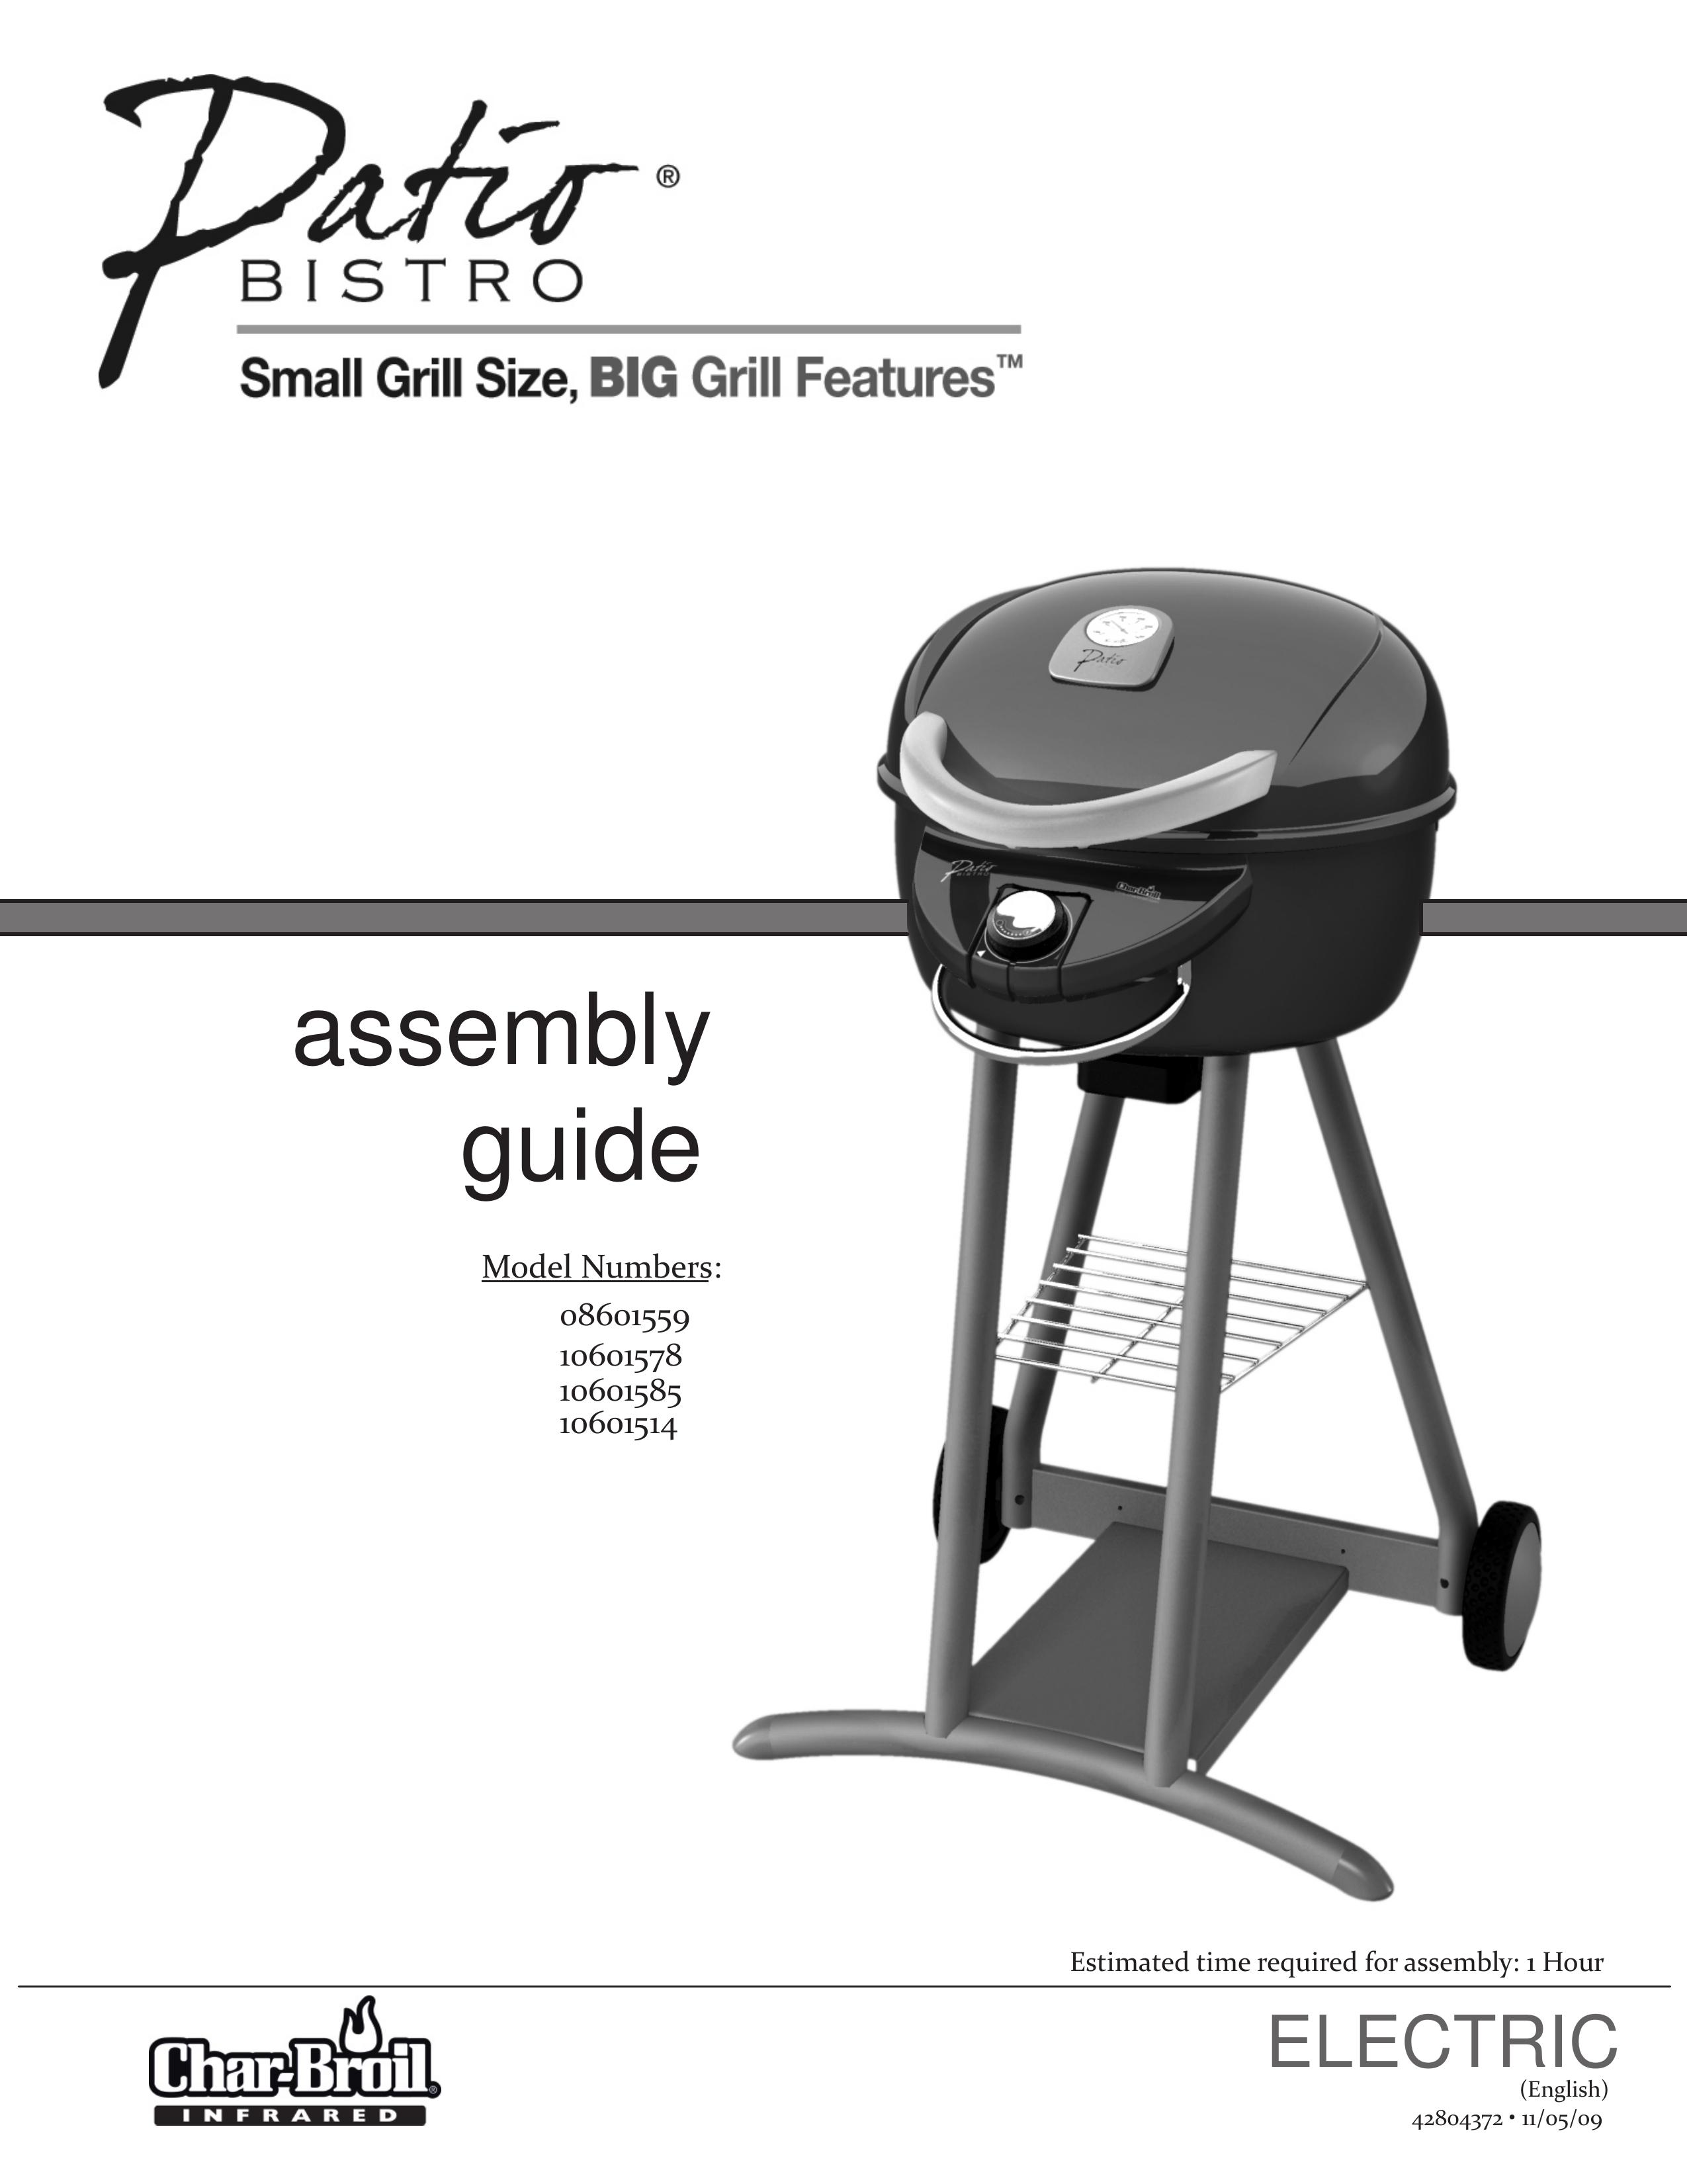 Char-Broil 10601578 Electric Grill User Manual